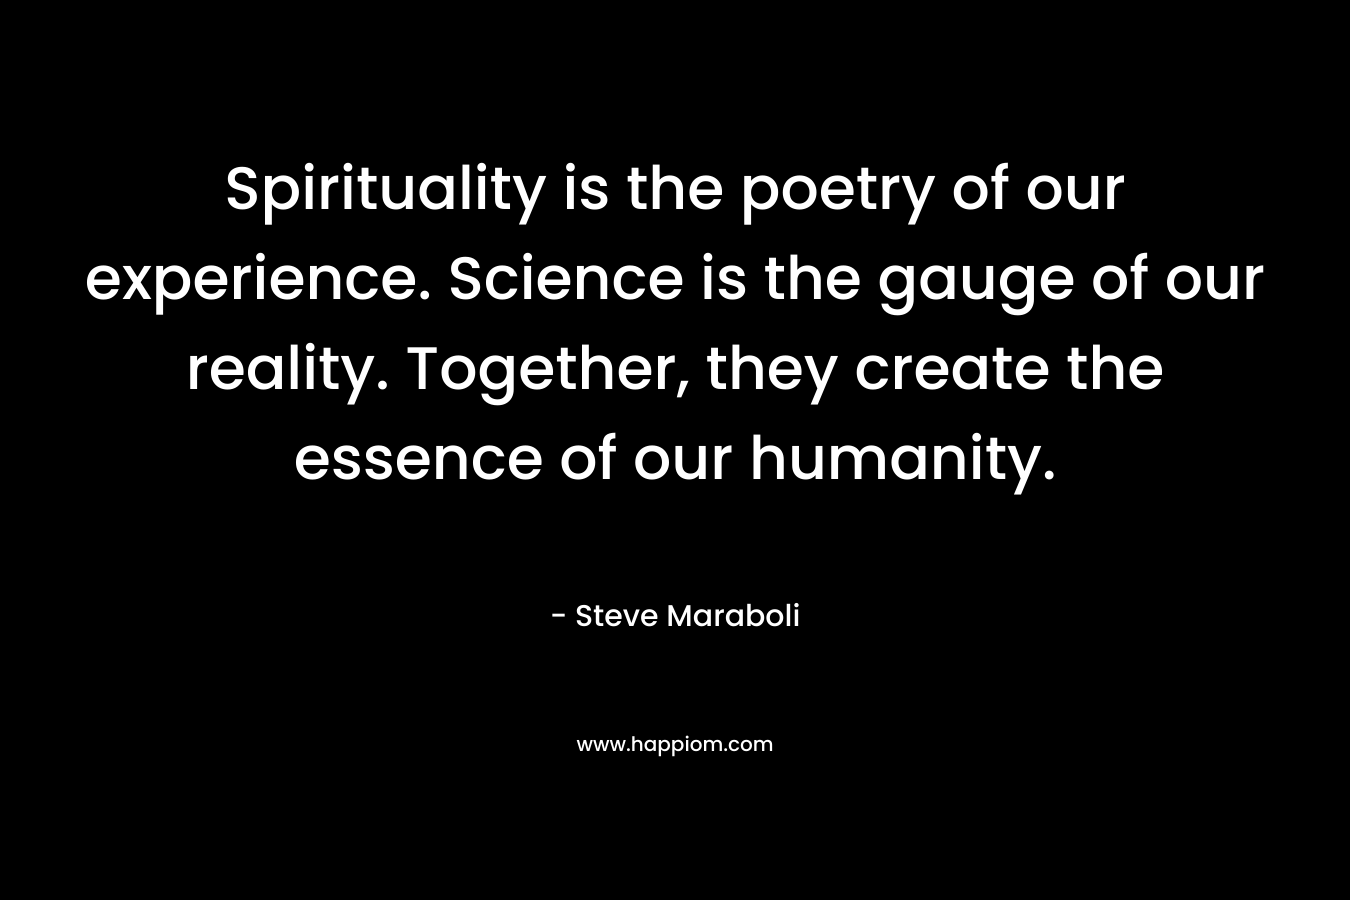 Spirituality is the poetry of our experience. Science is the gauge of our reality. Together, they create the essence of our humanity.